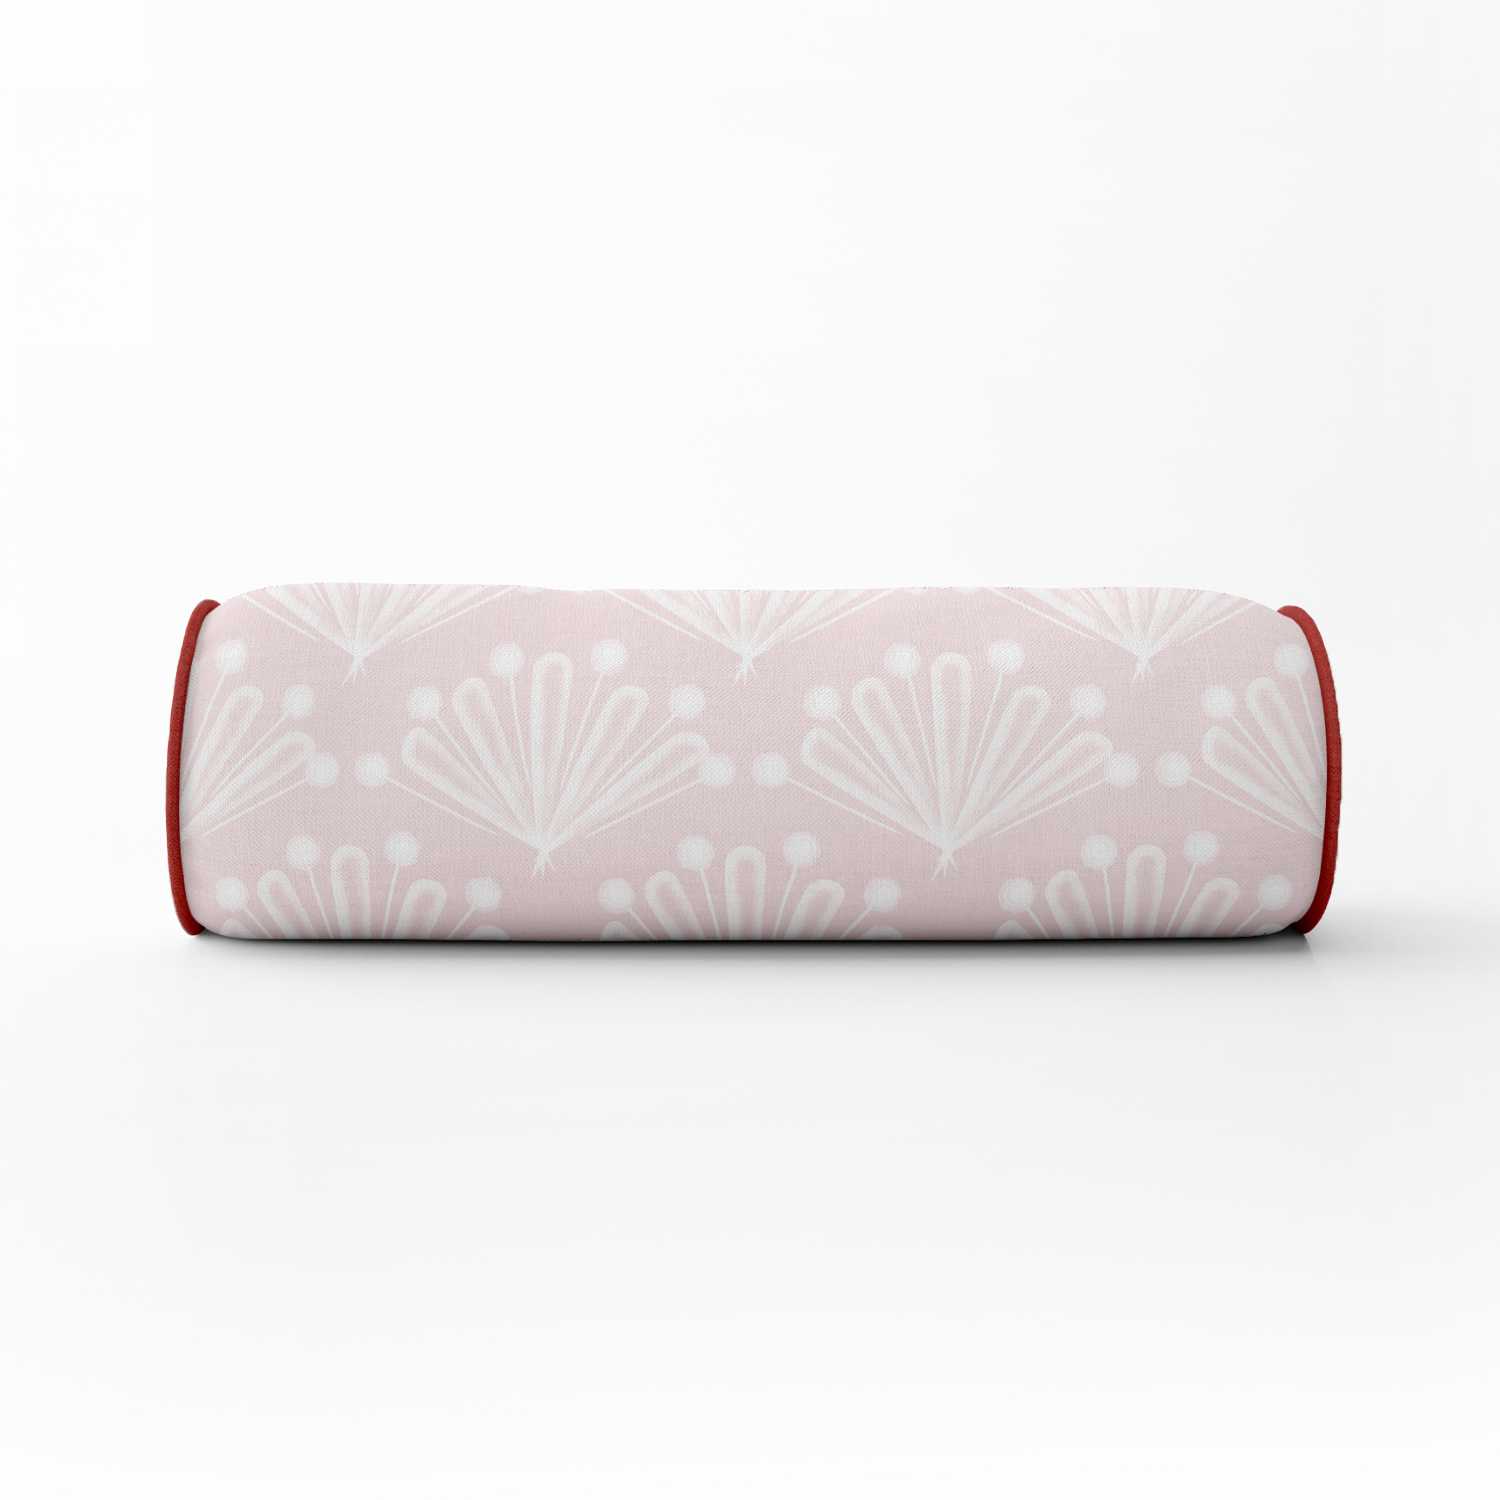 large-scale-rose-flower-bolster-red-piping-293083.jpg